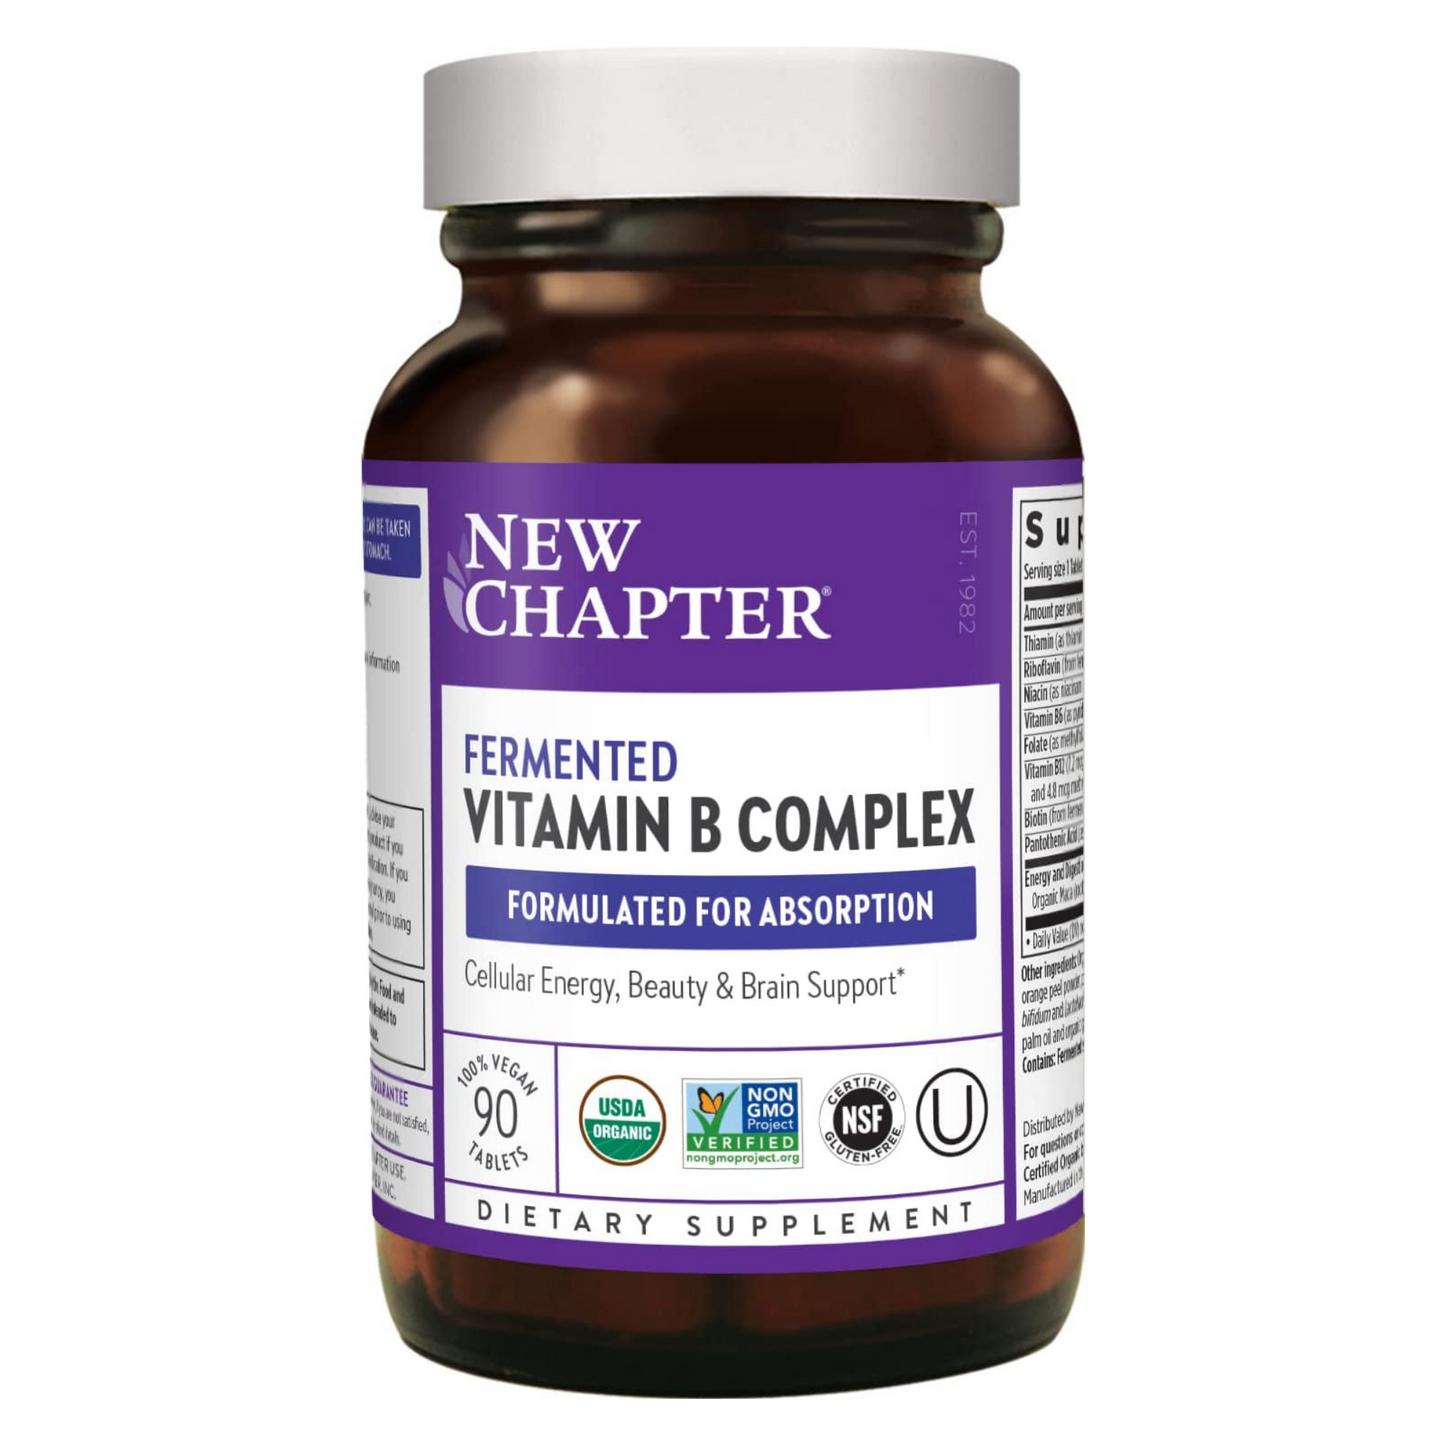 Primary Image of Fermented Vitamin B Complex Tablets